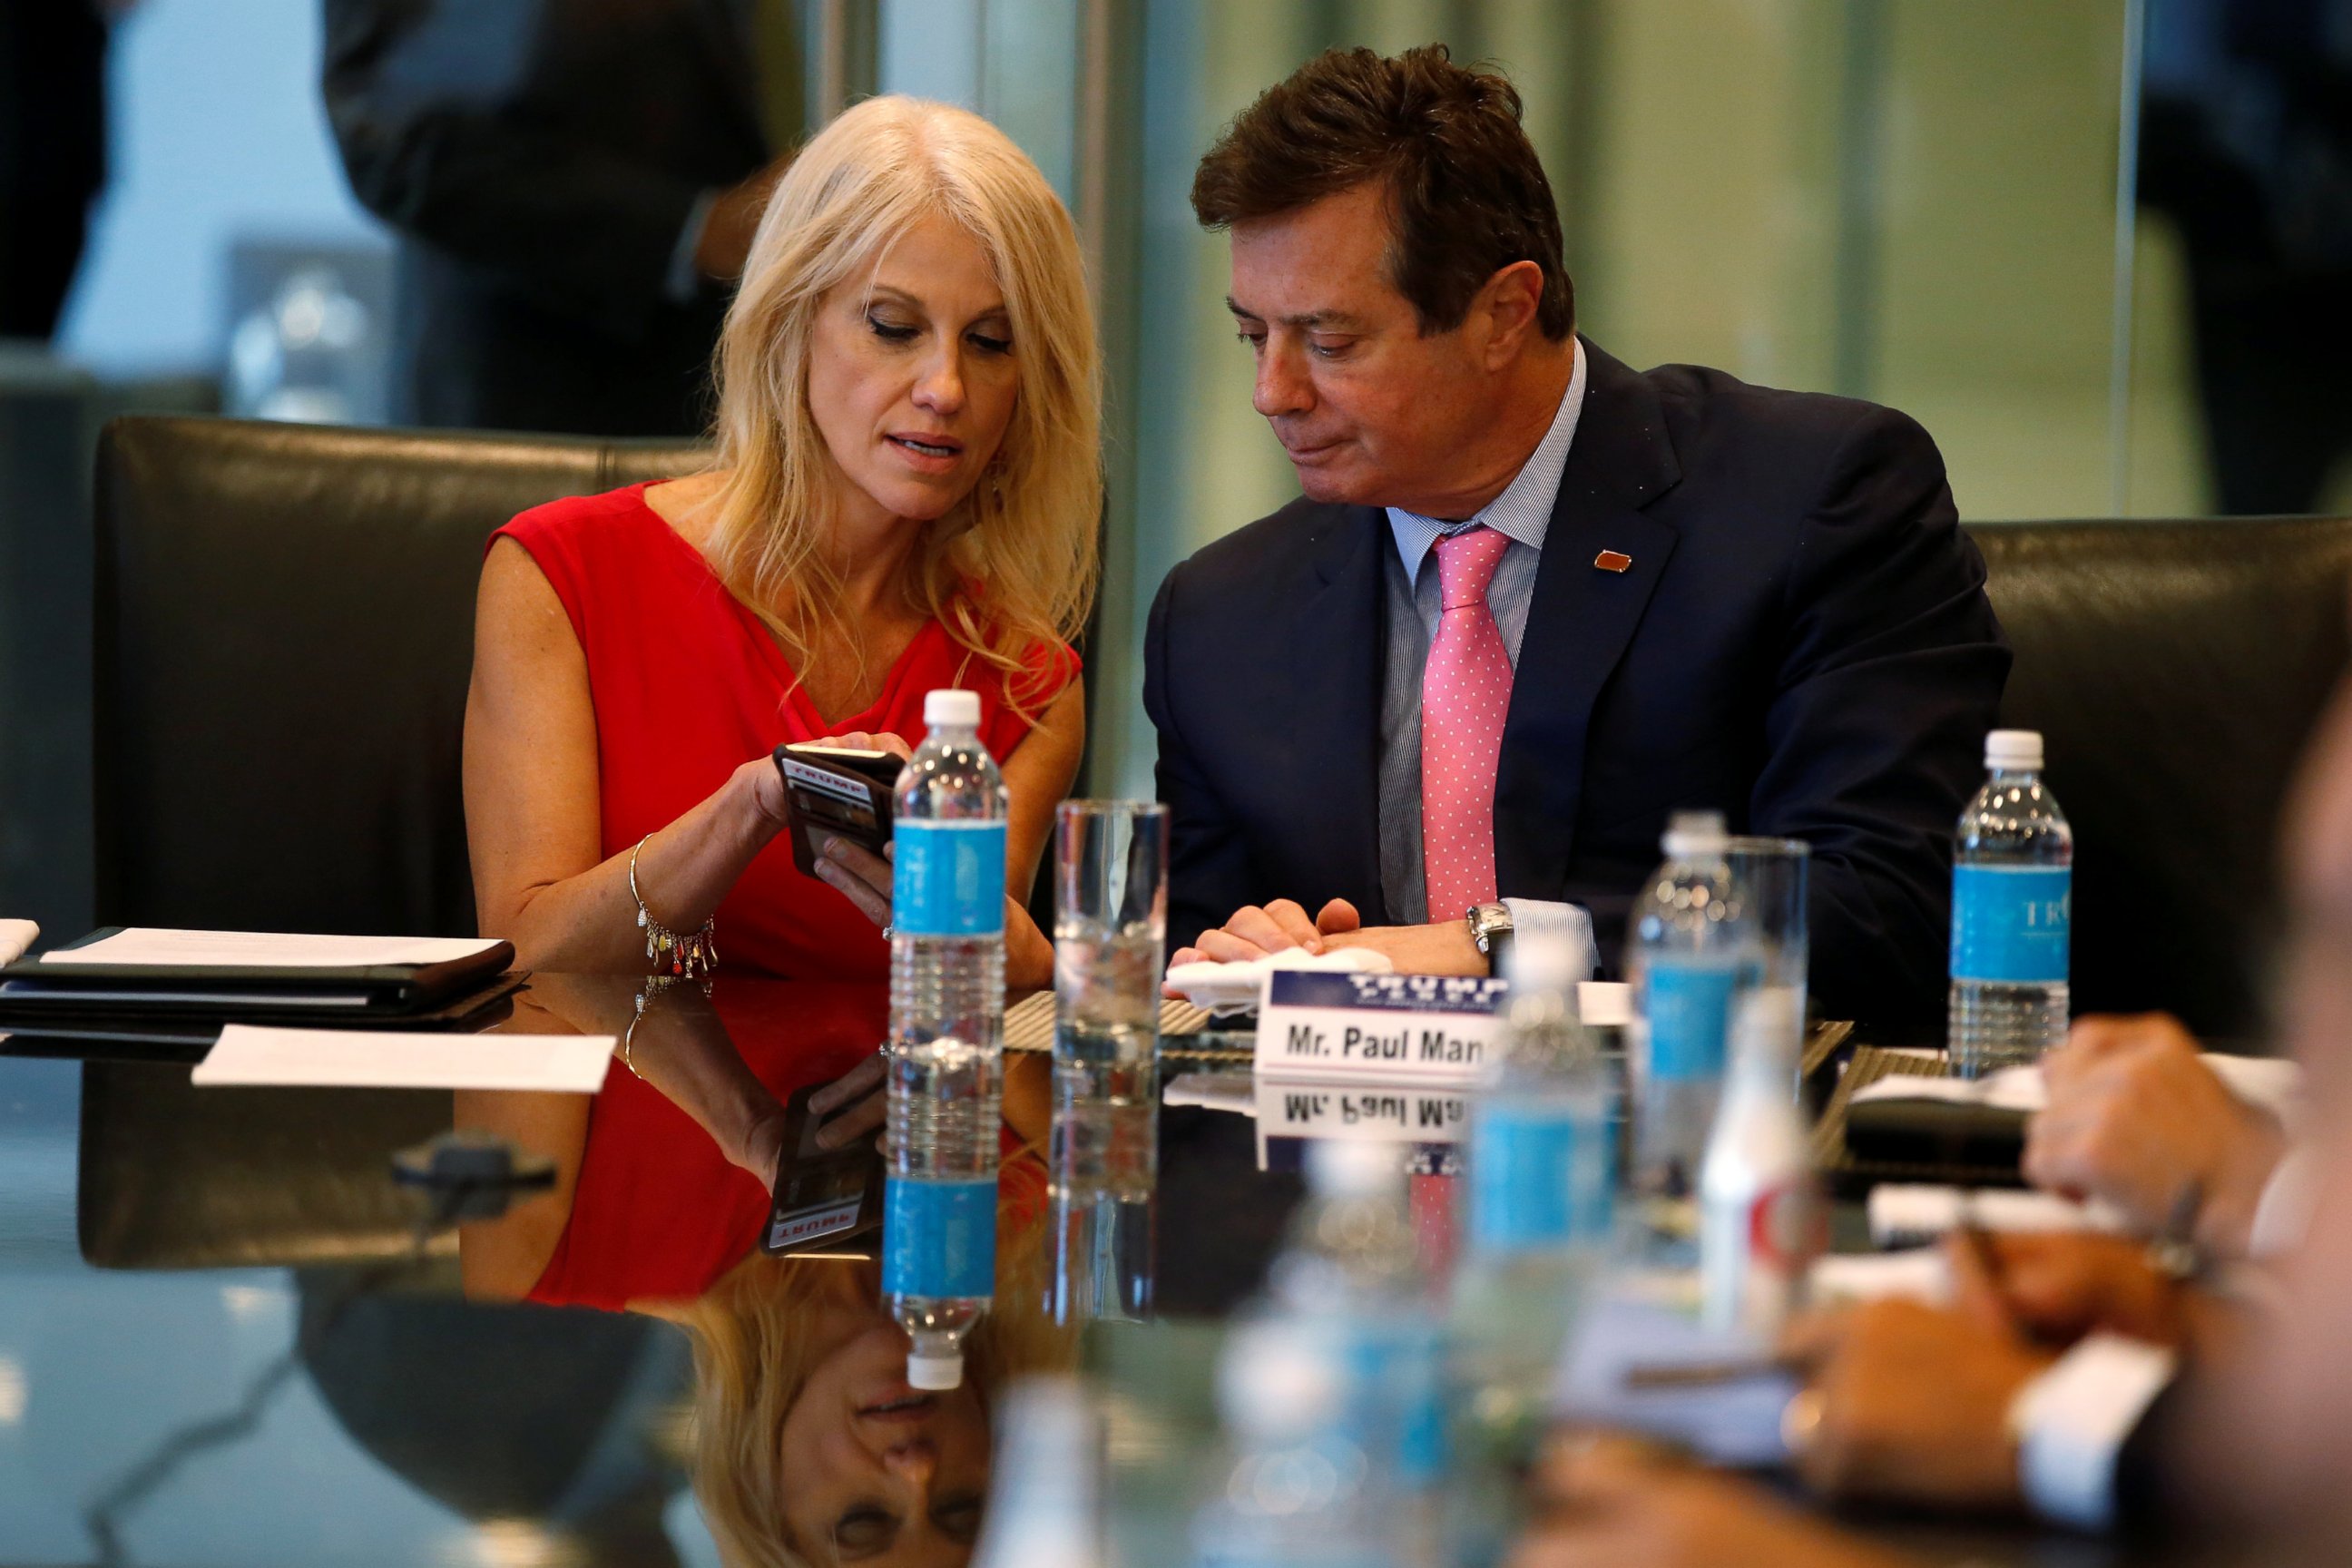 PHOTO: Kellyanne Conway and Paul Manafort speak during a round table discussion on security at Trump Tower in New York, Aug. 17, 2016. 